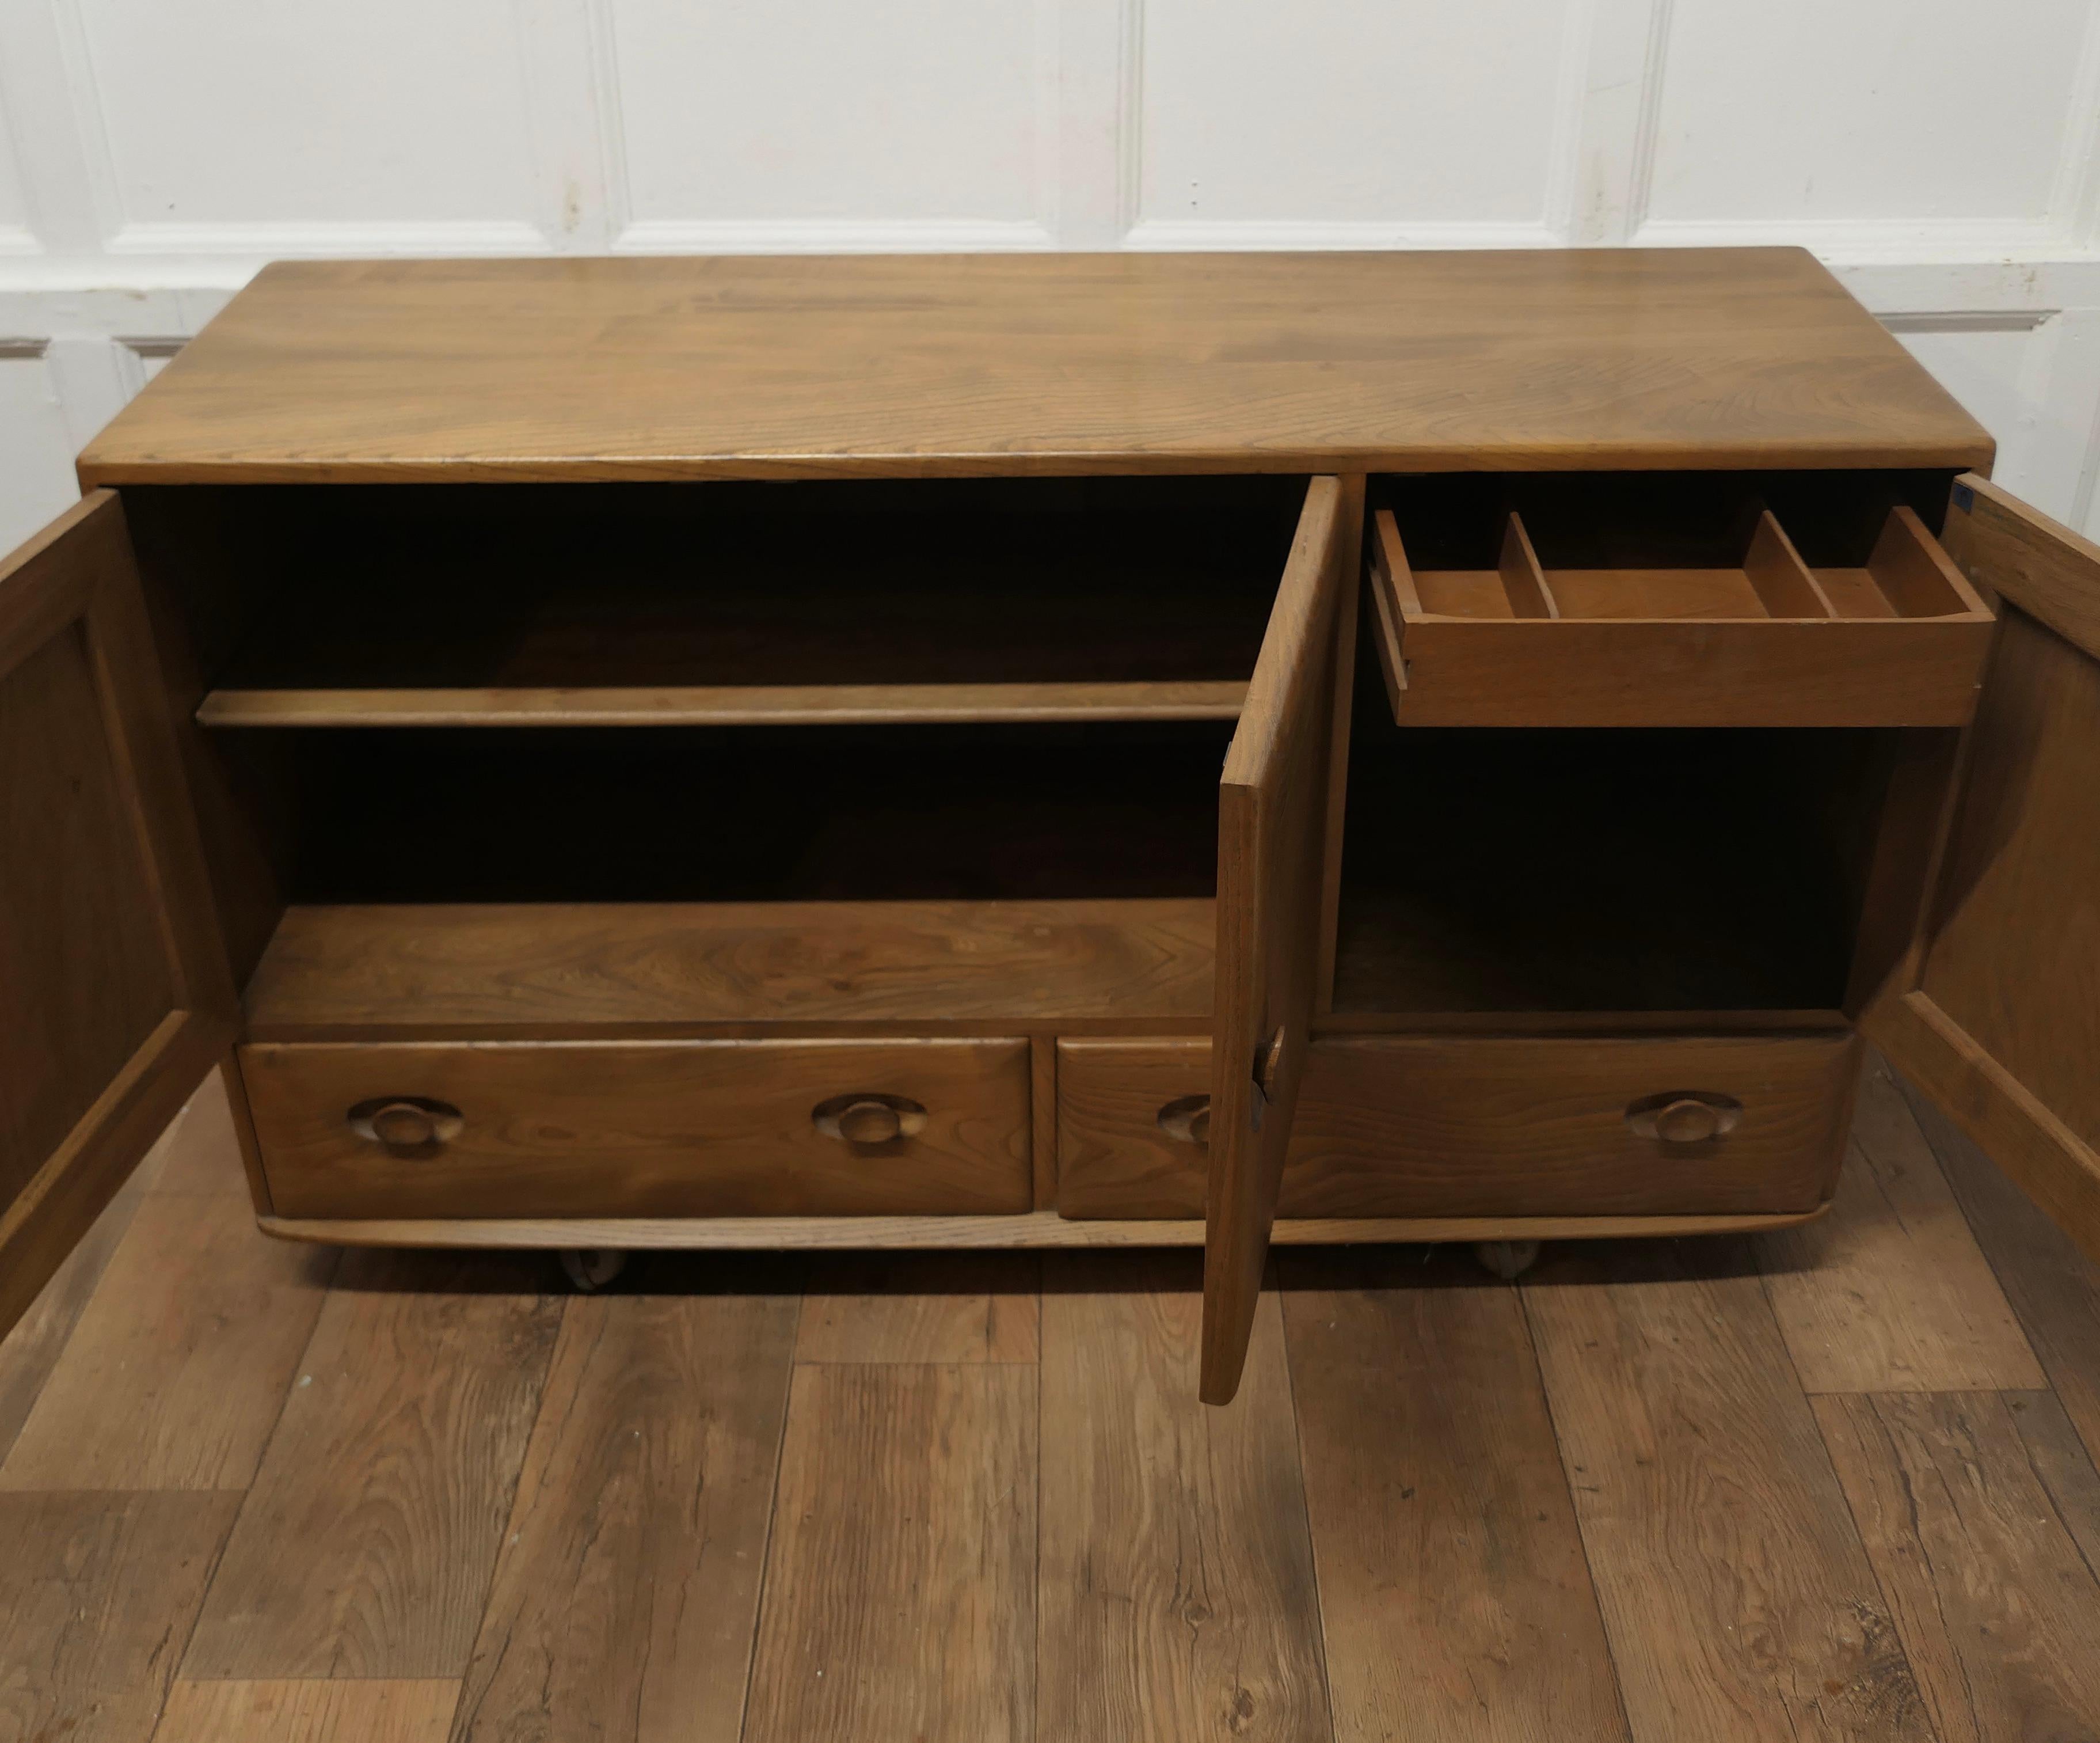 A Mid Century Golden Elm Sideboard by Ercol  The sideboard has 3 cupboard doors  1